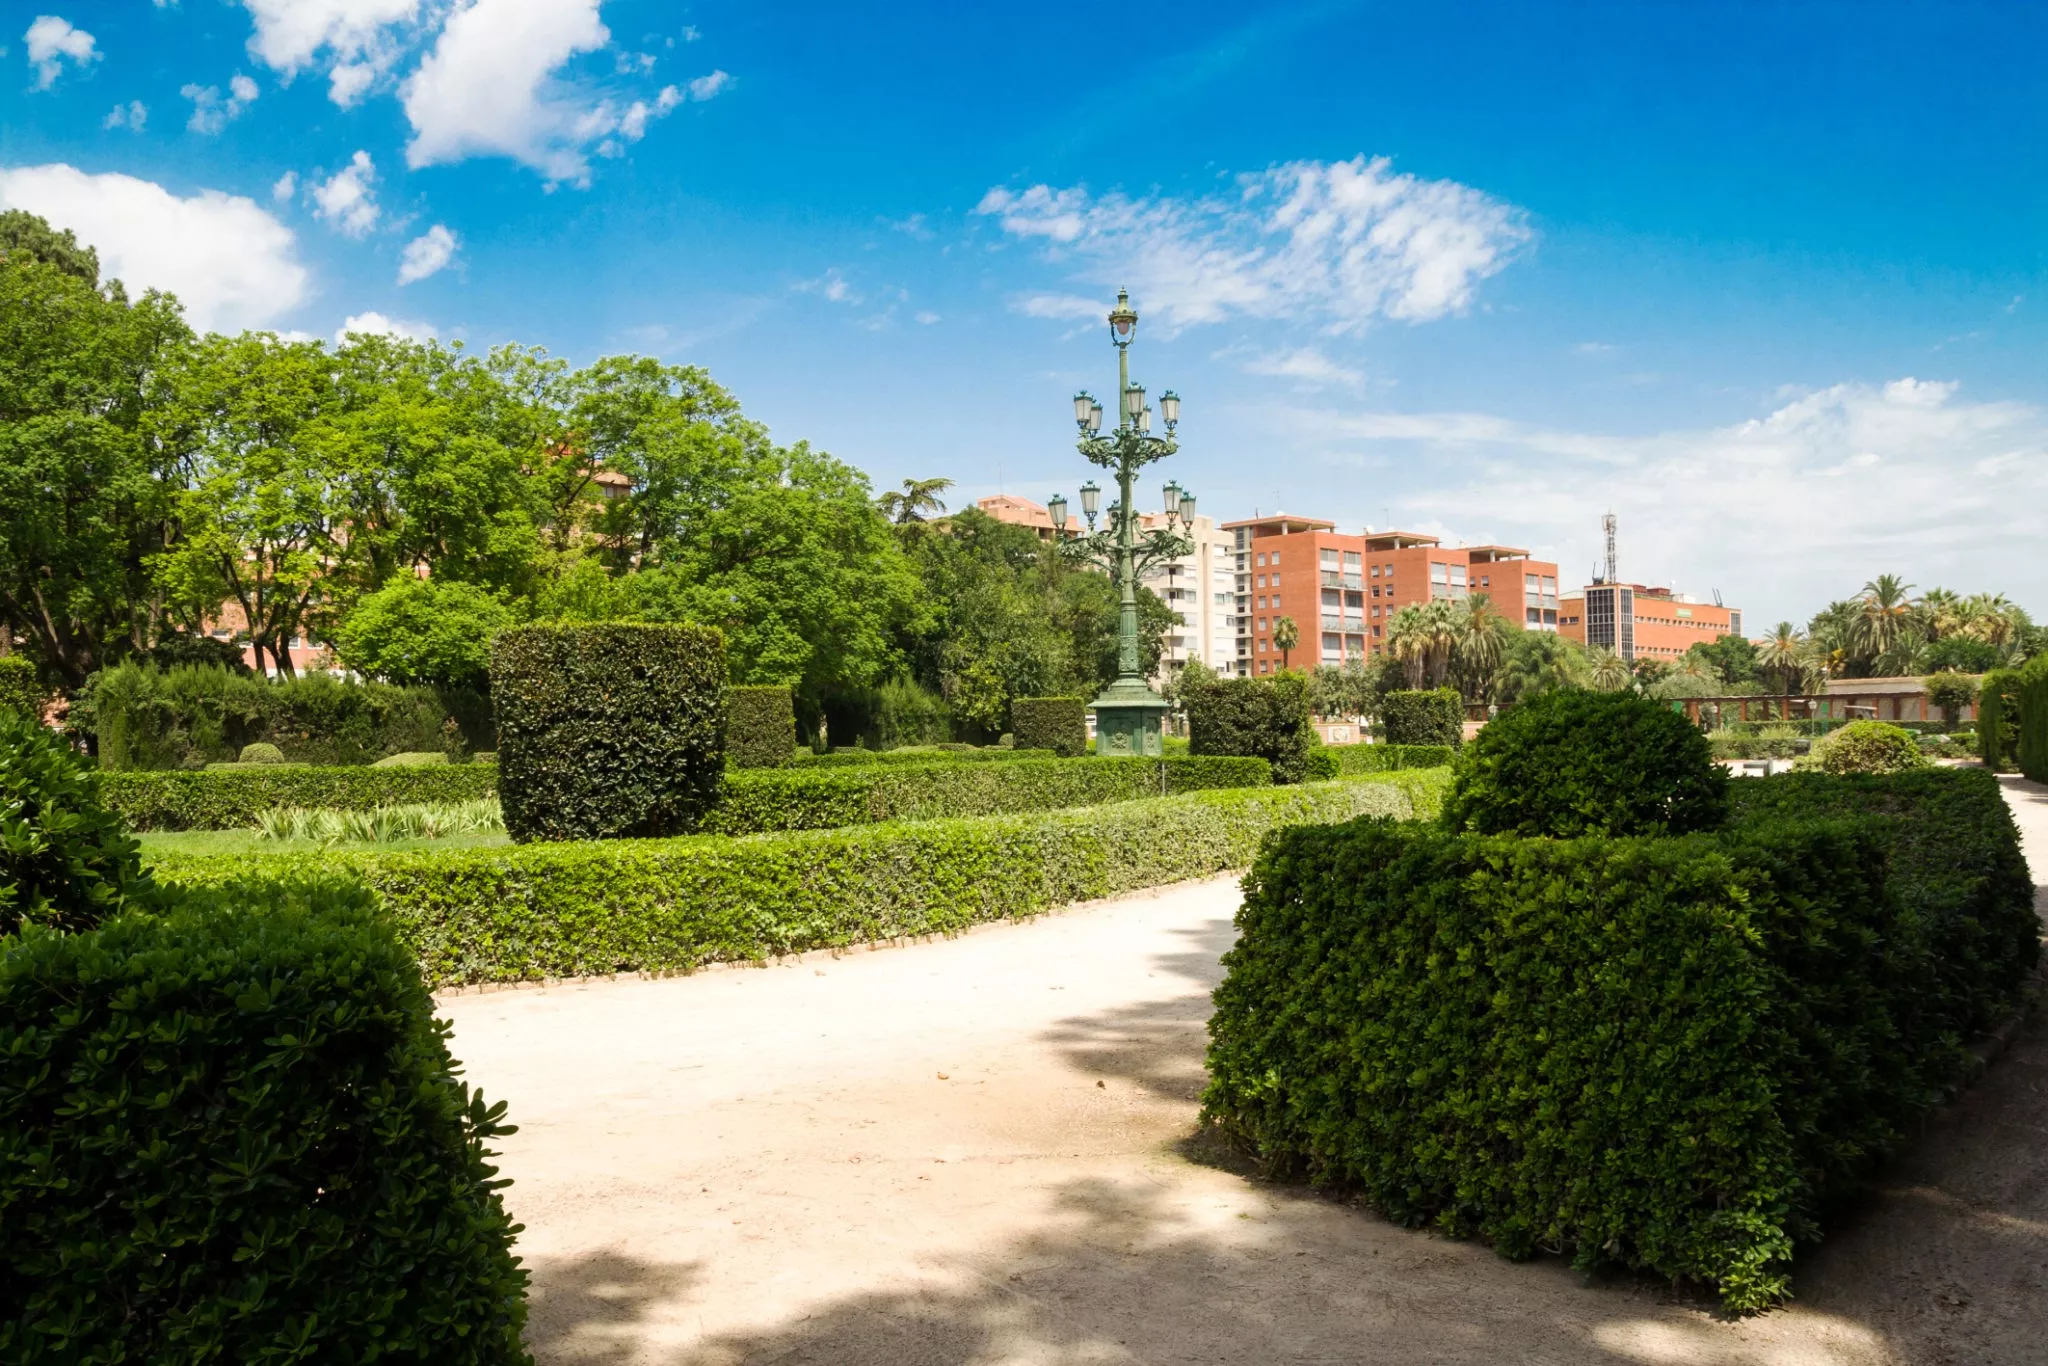 Gardens of the Real One in Spain, Europe | Parks - Rated 4